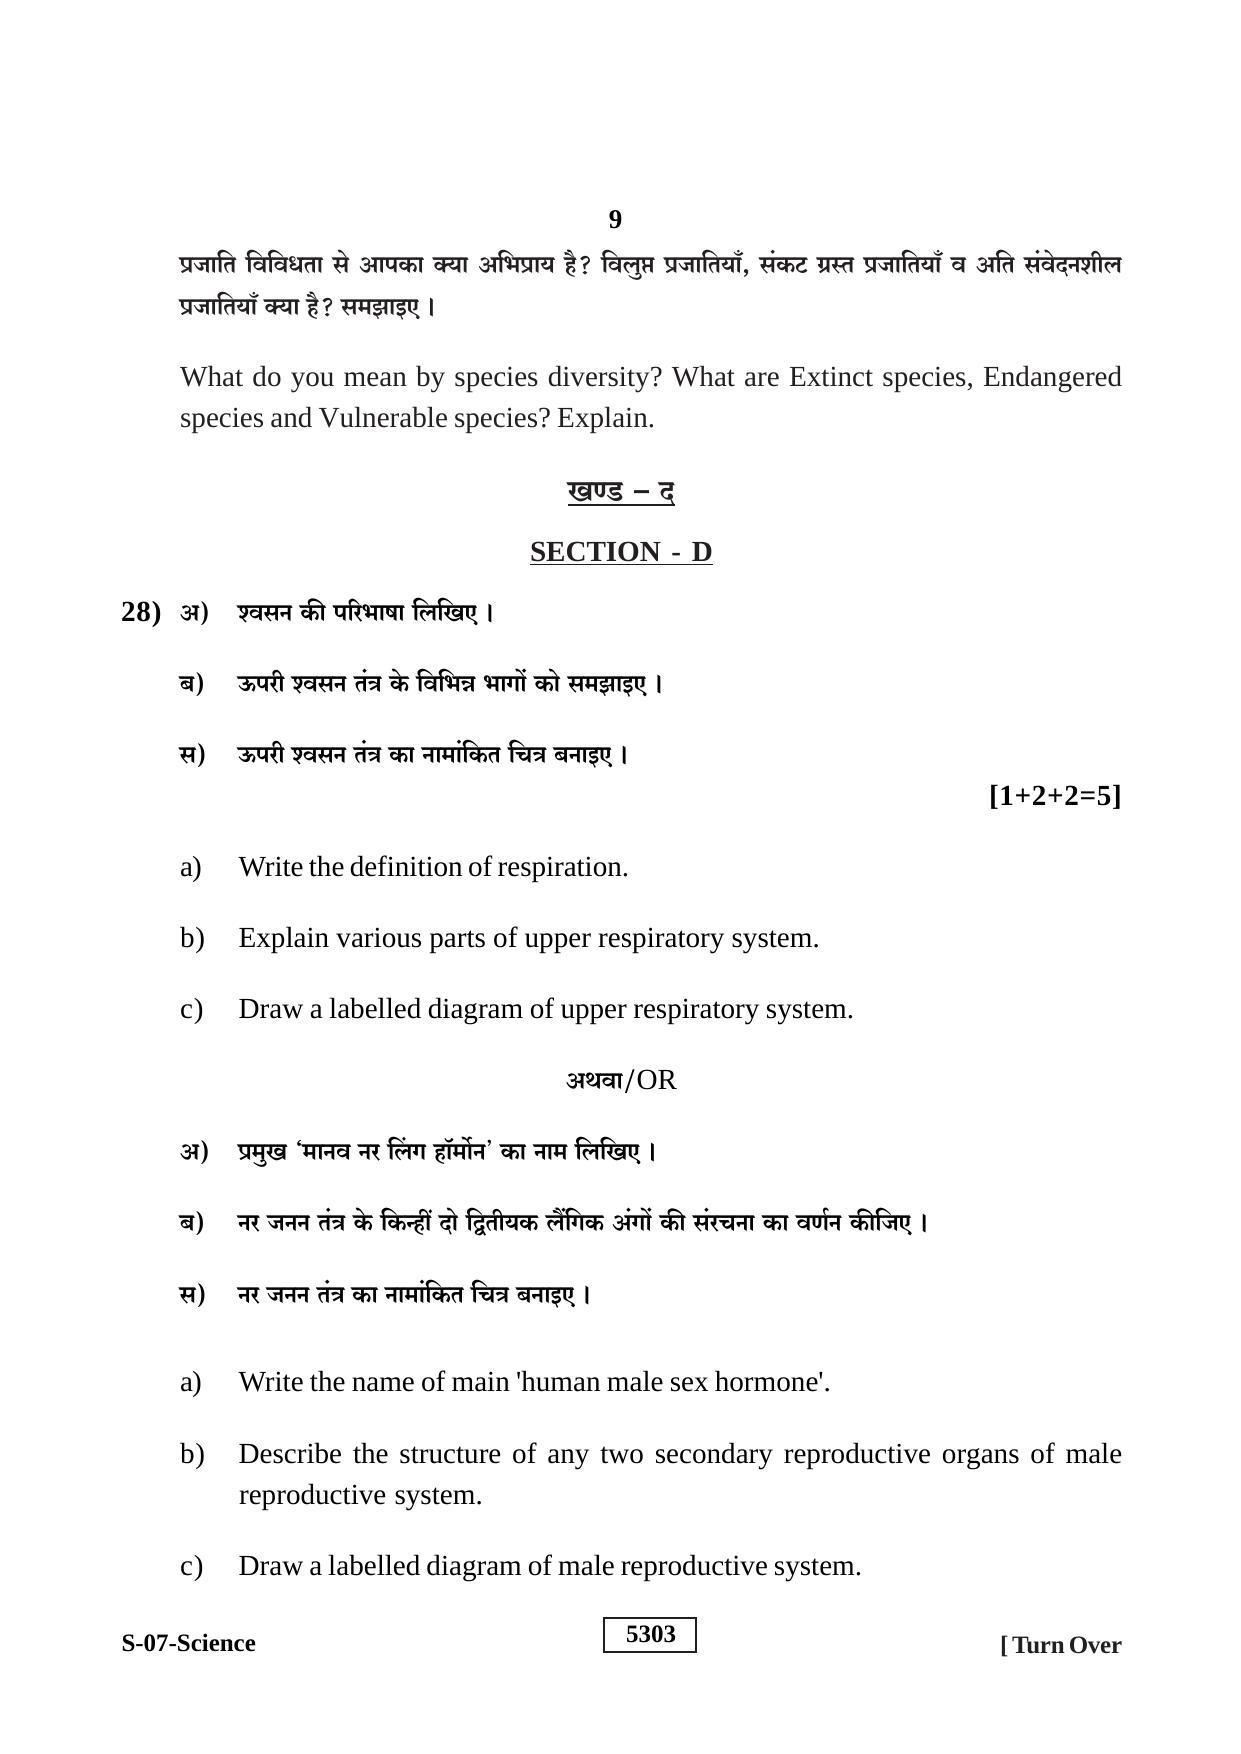 RBSE Class 10 Science 2020 Question Paper - Page 9